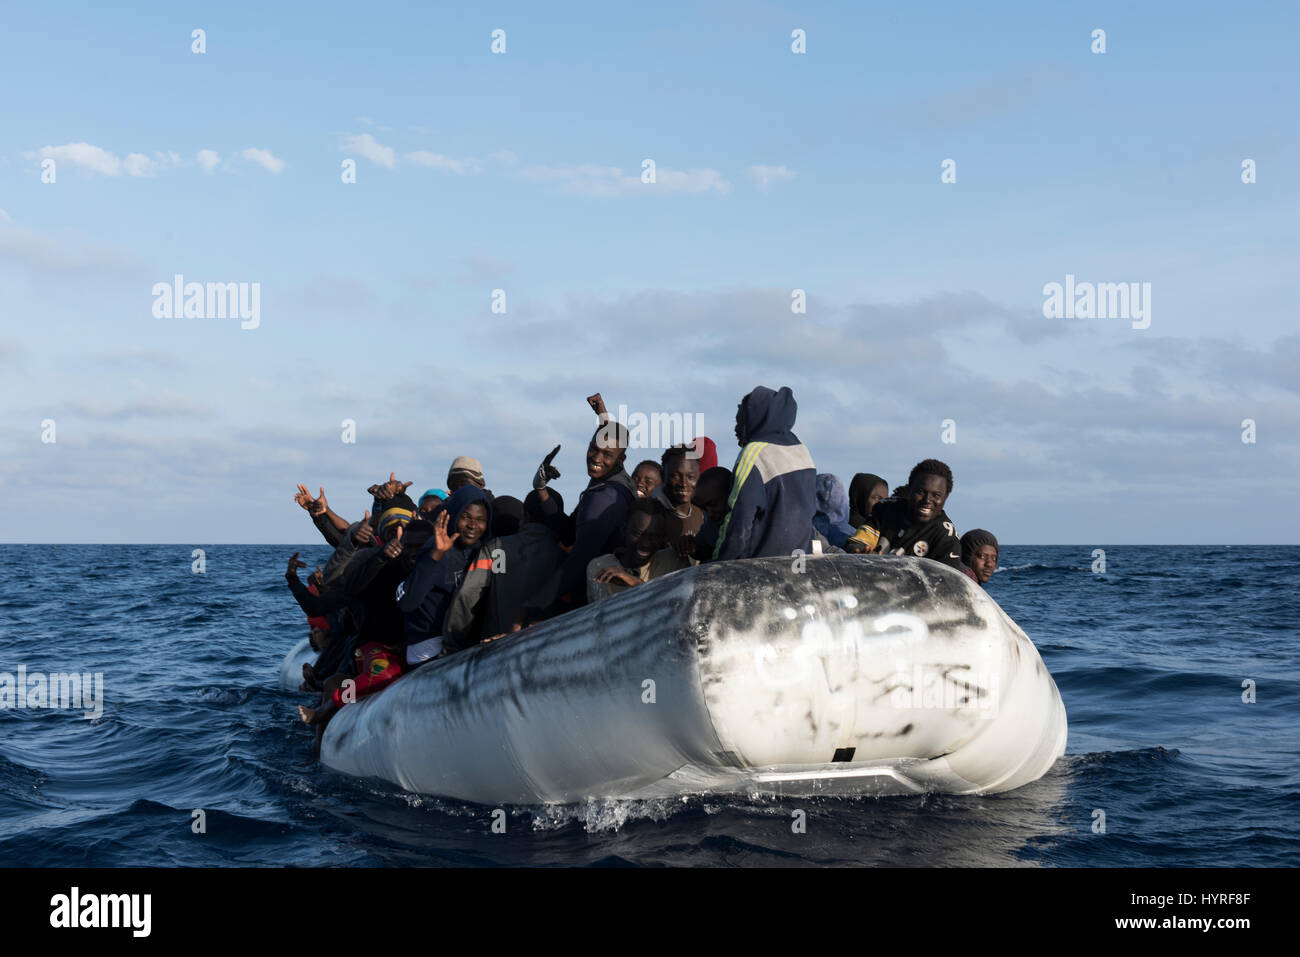 About 150 refugees/migrants from africa sitting on a rubberboat in bad condition and want to cross the mediterrean sea to europe. Stock Photo